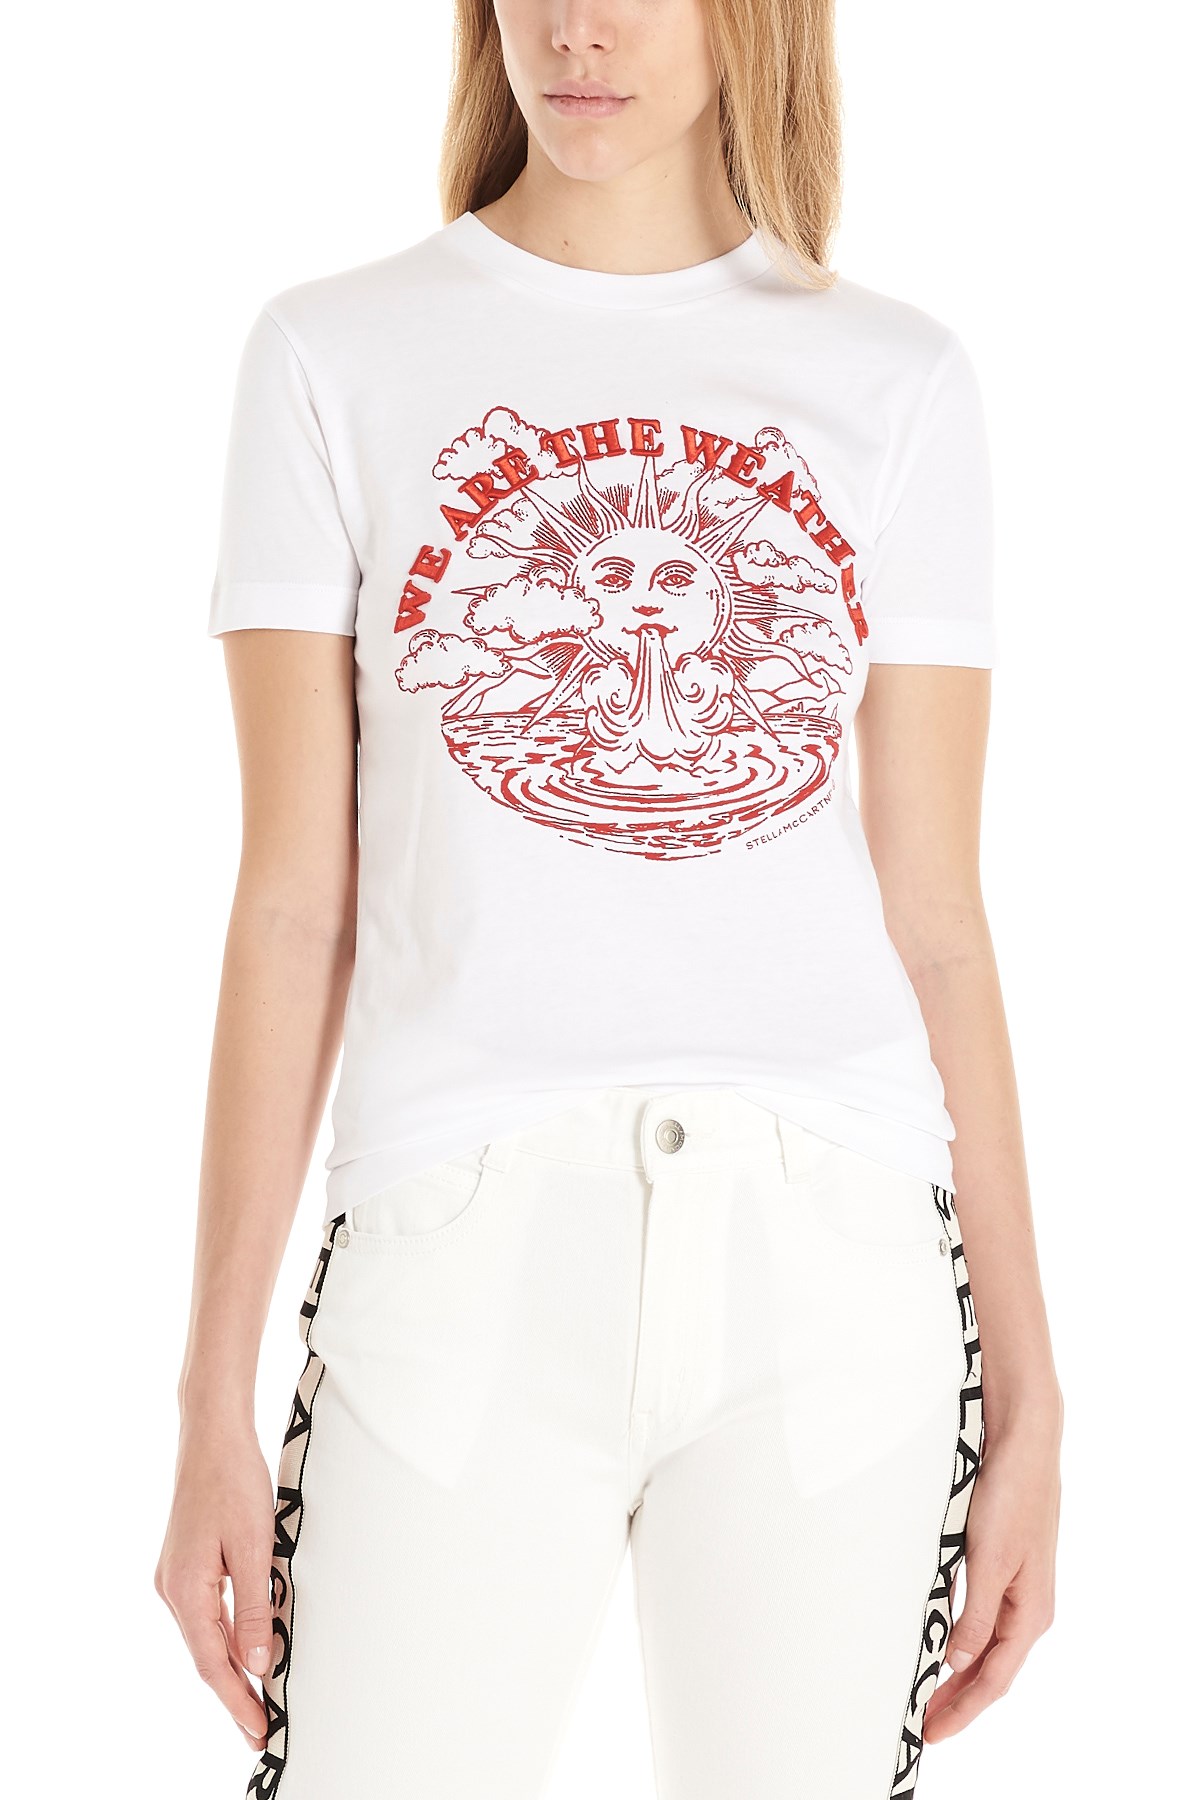 STELLA MCCARTNEY 'We Are The Weather' T-Shirt